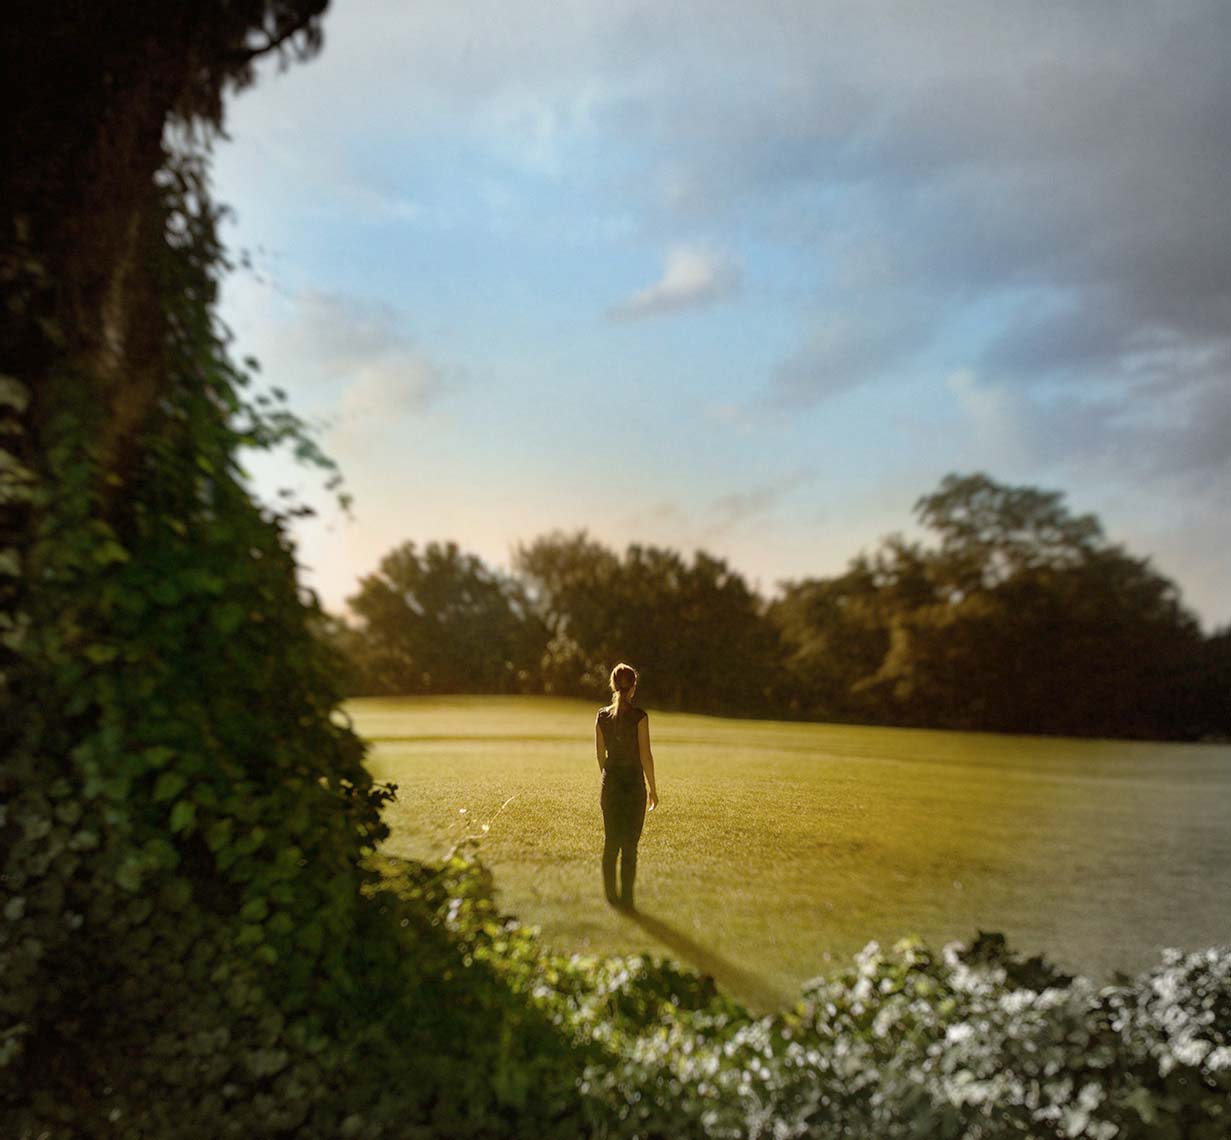 Trim young woman in slacks and short sleeves with ponytail, back to camera, standing in middle of large green lawn on sunny morning, framed by trees in front and behind hereverylast